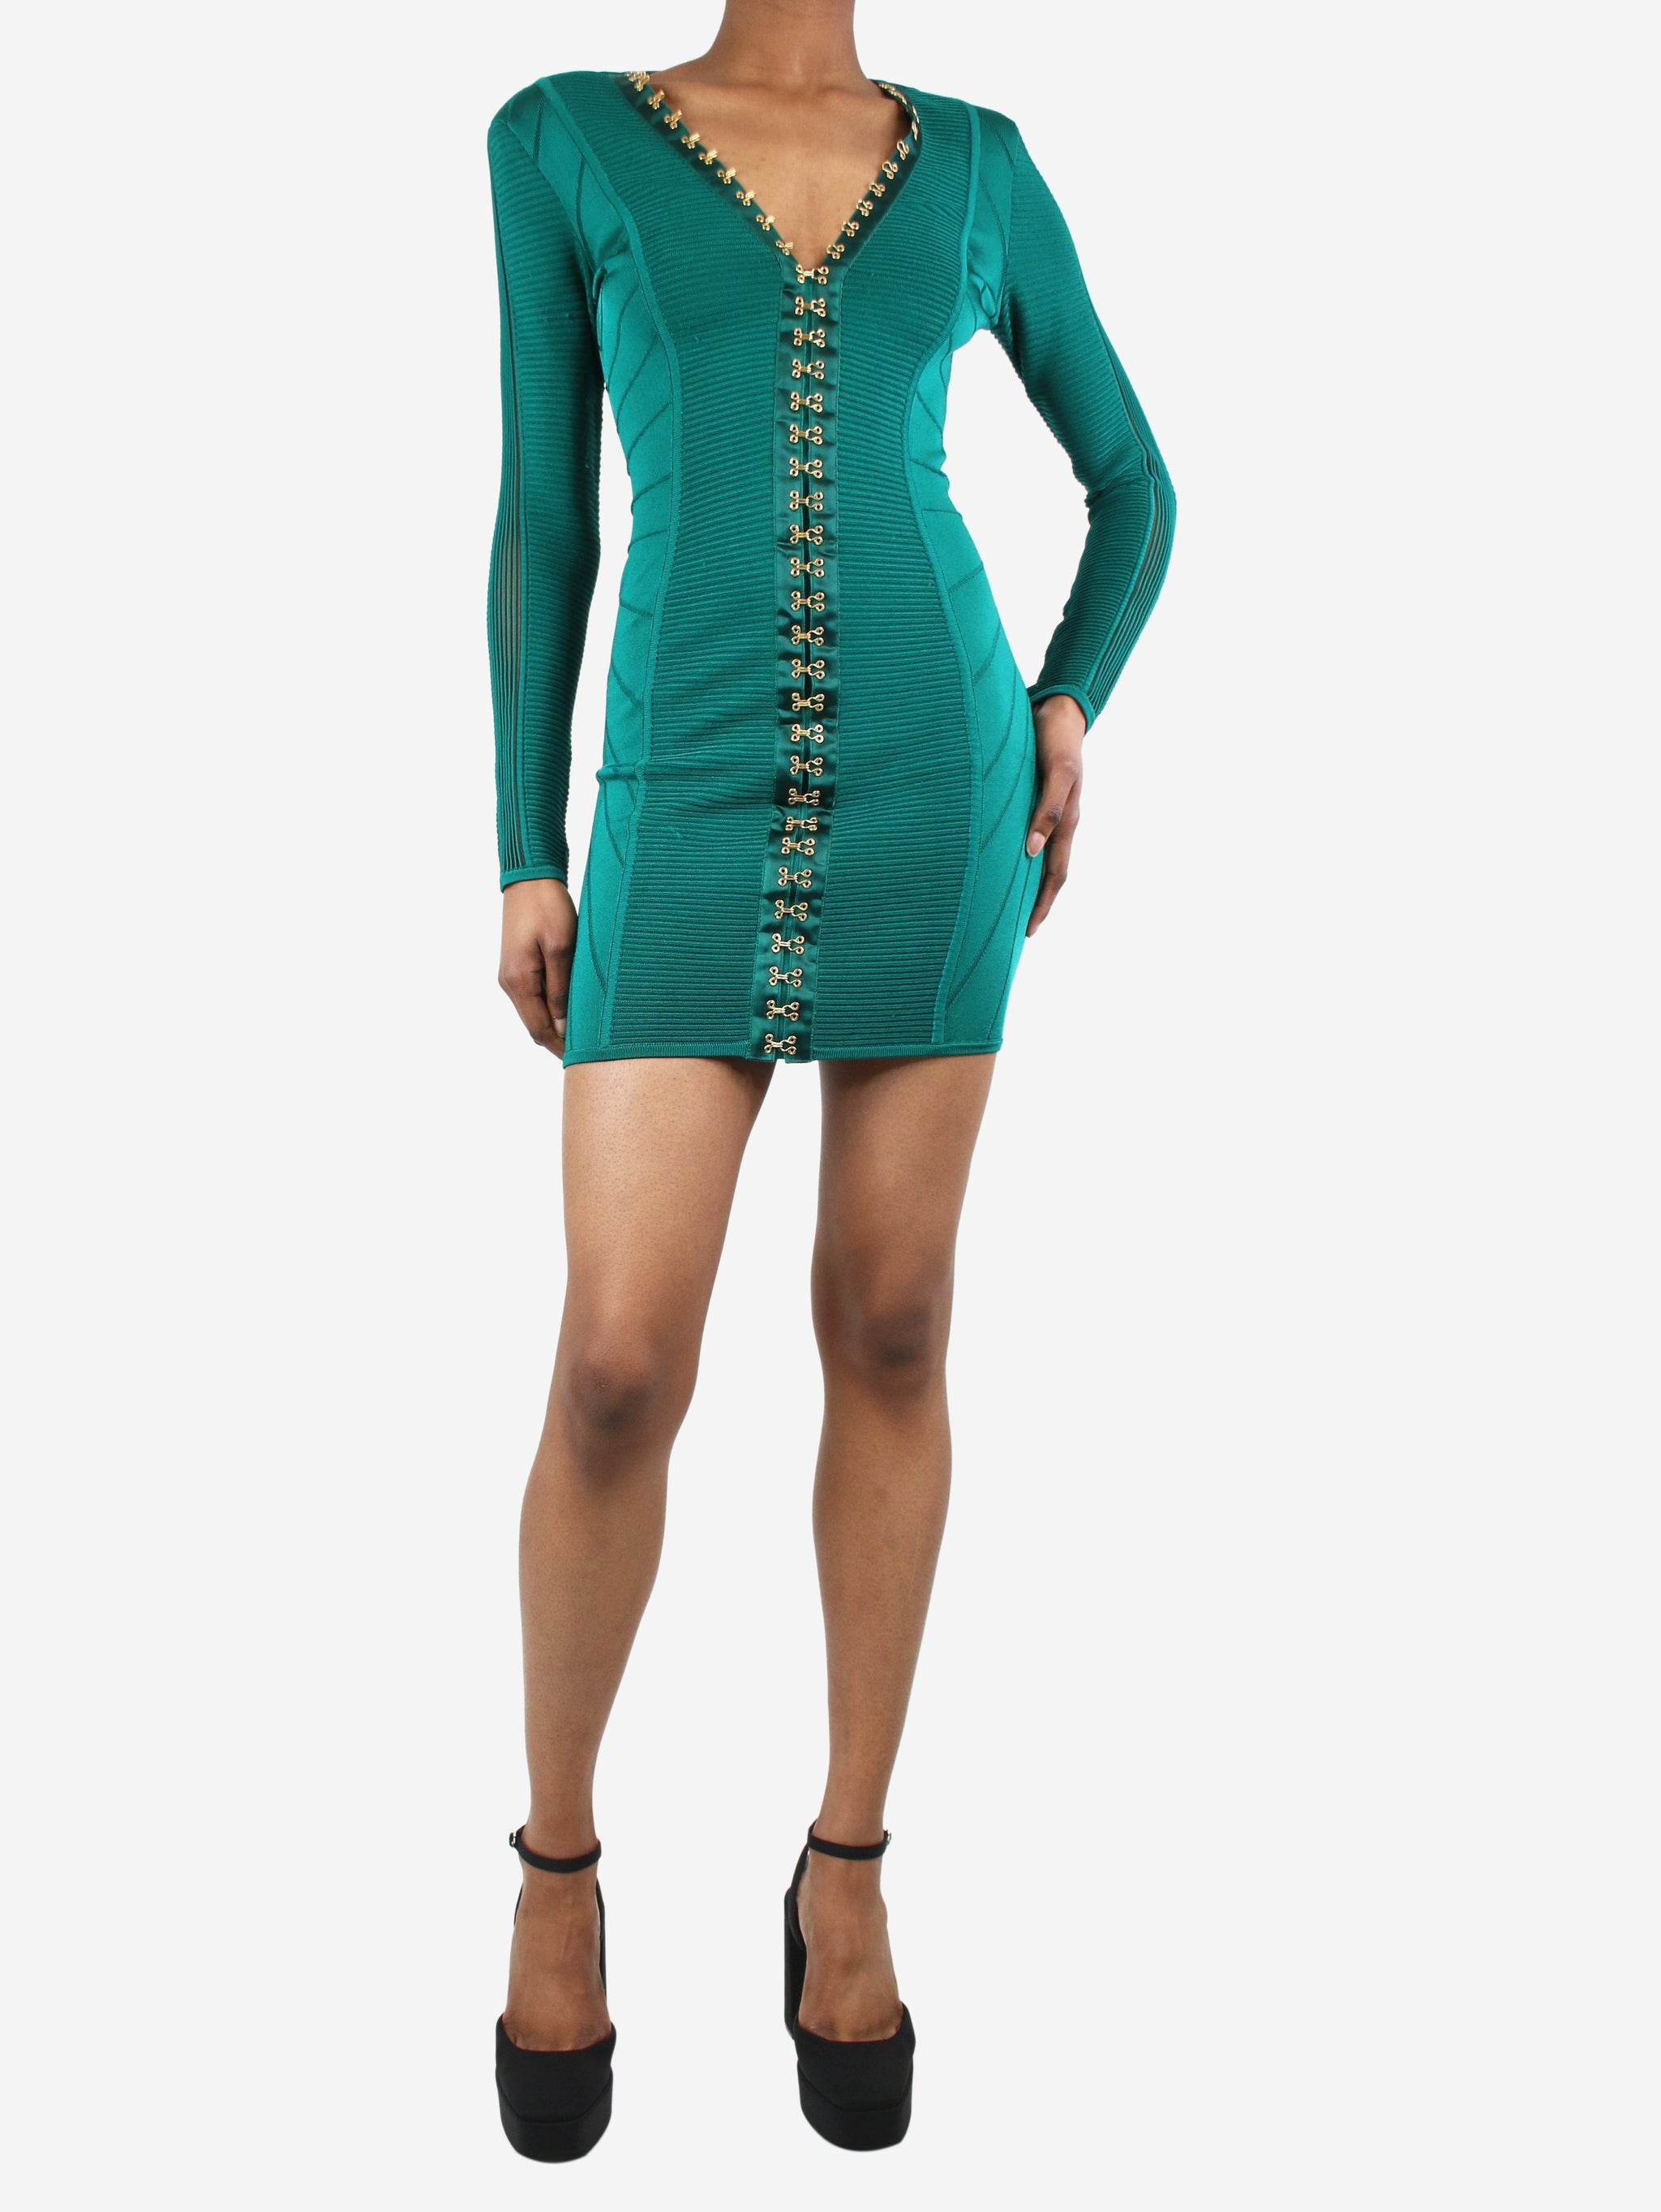 Balmain pre-owned green padded-shoulders fitted dress | Sign of the Times